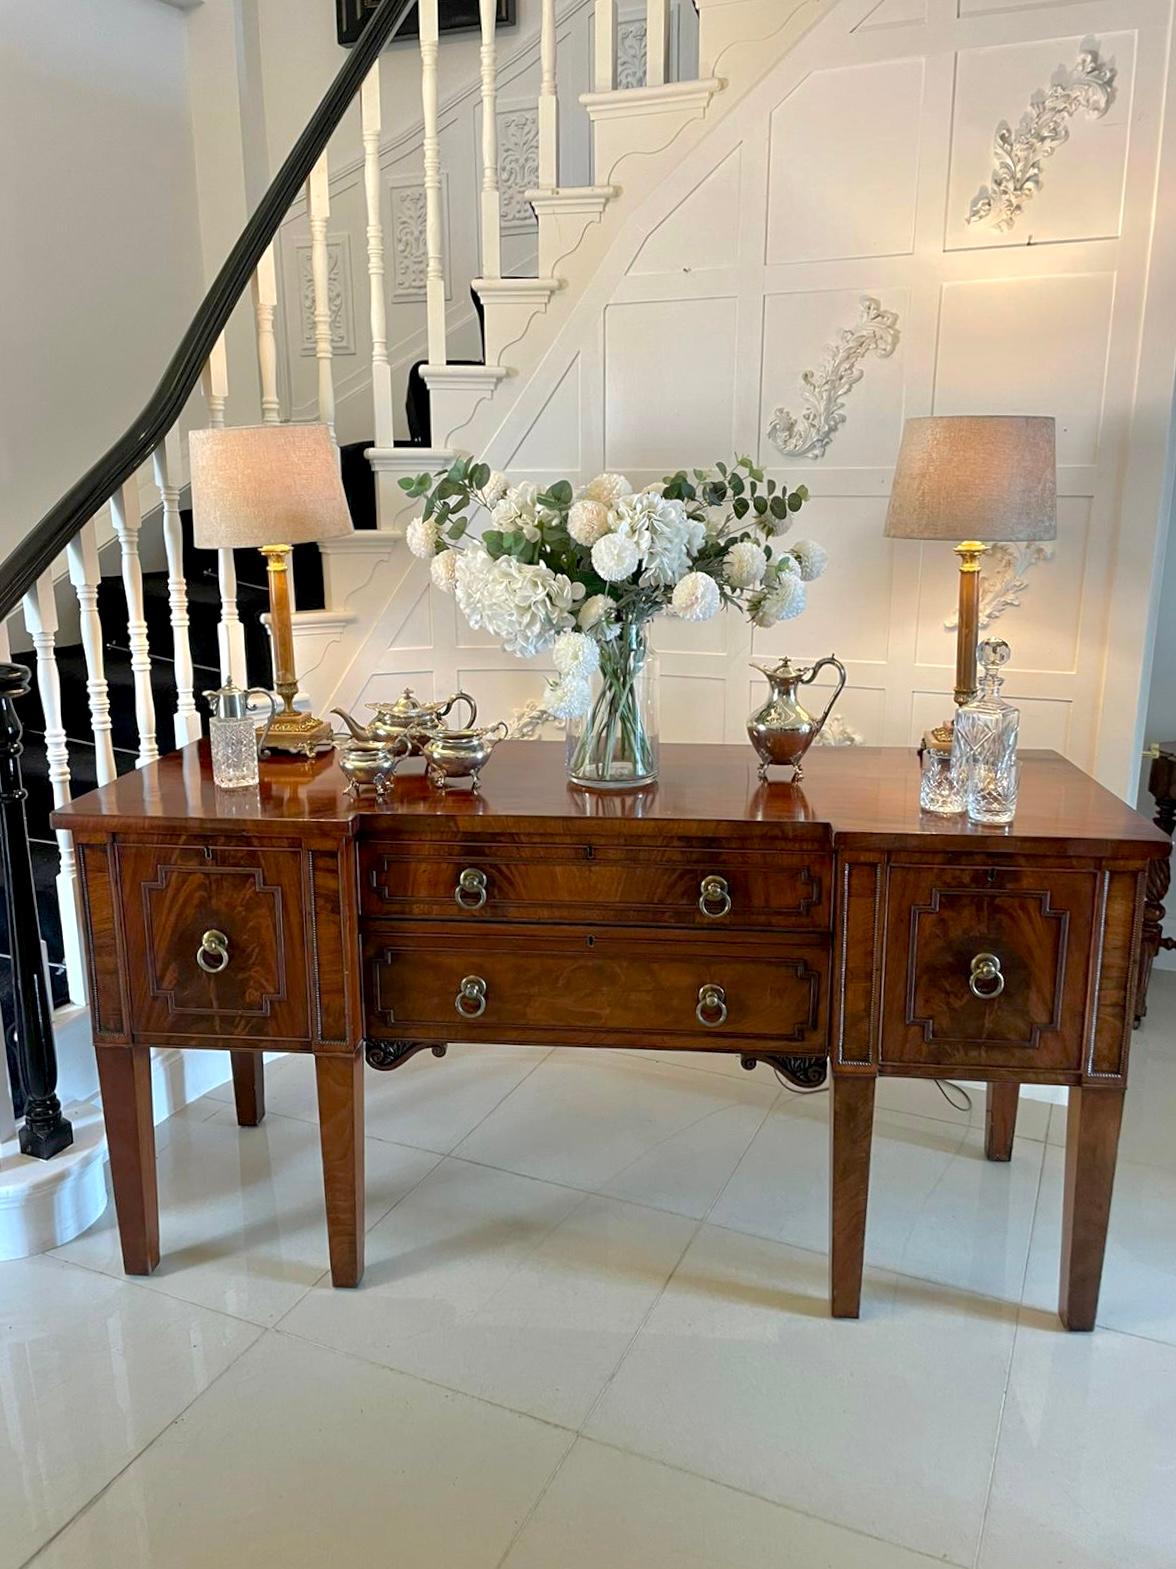 Superior quality antique Regency mahogany sideboard with an exquisite mahogany inverted breakfront top, two long cutlery drawers to the front flanked either side by a wine drawer and a cupboard door all with original brass handles. It has beautiful